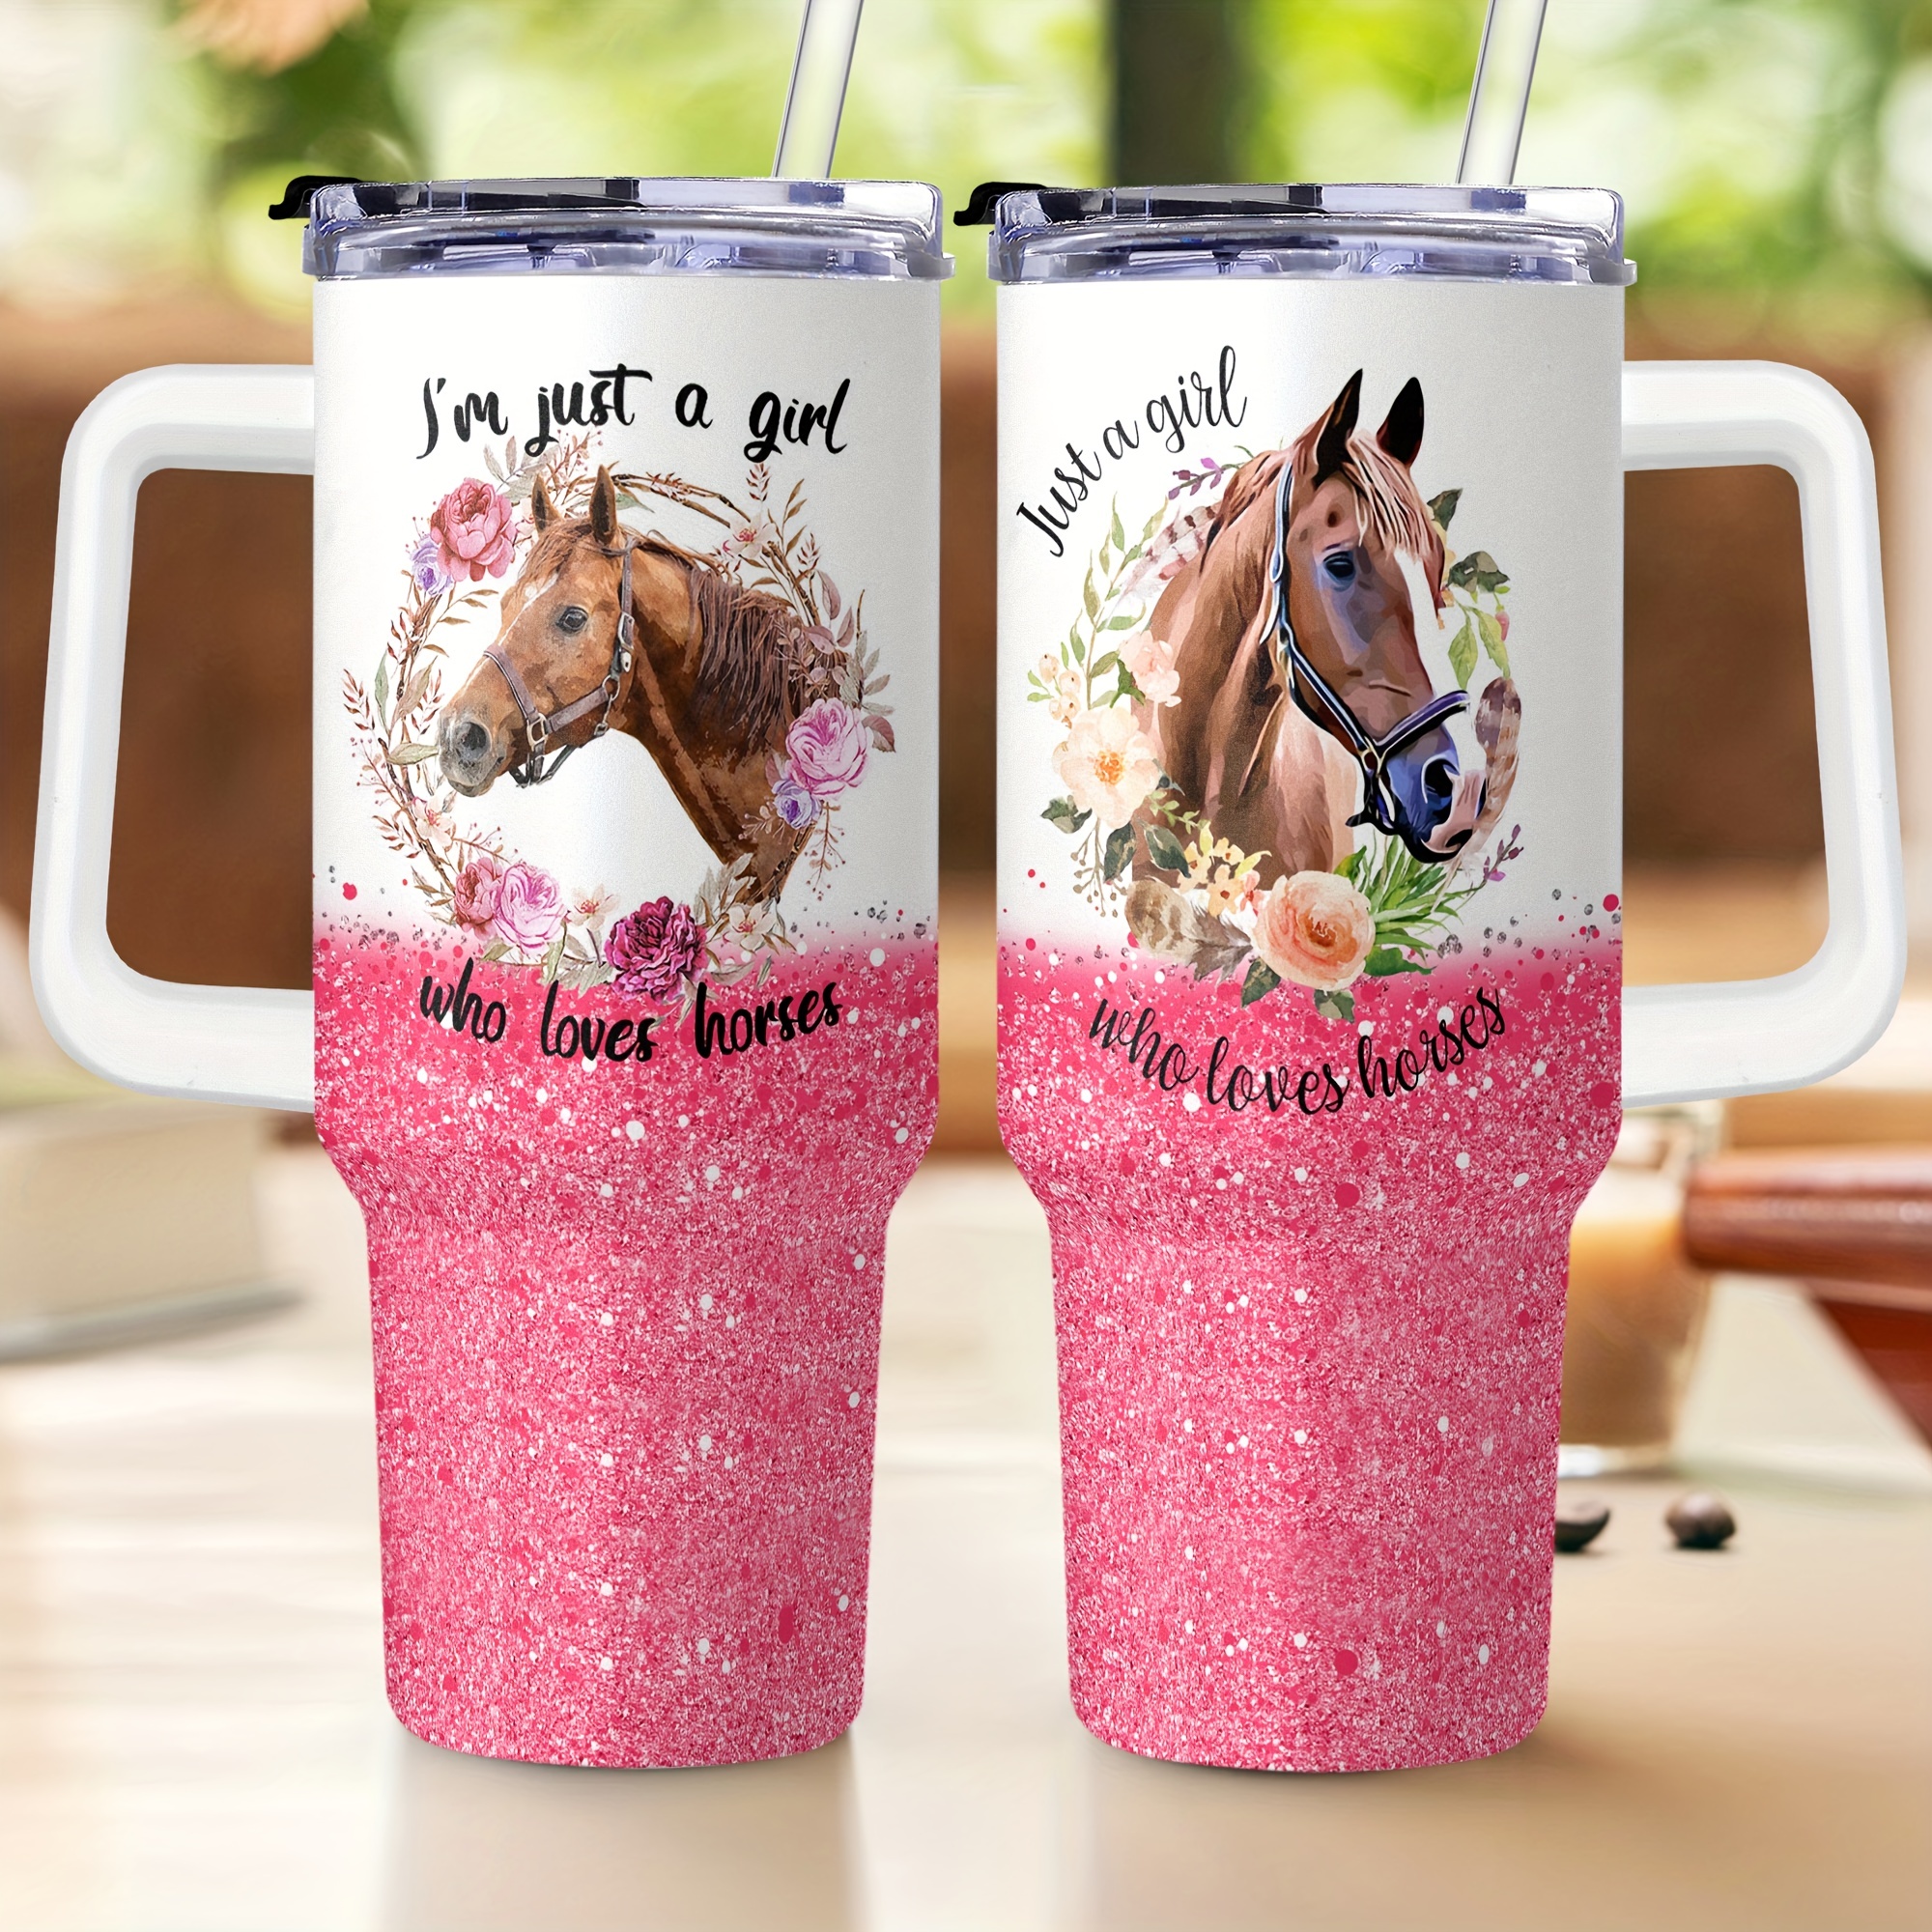 John 3:16 with Horses 20 oz insulated tumbler with lid and straw